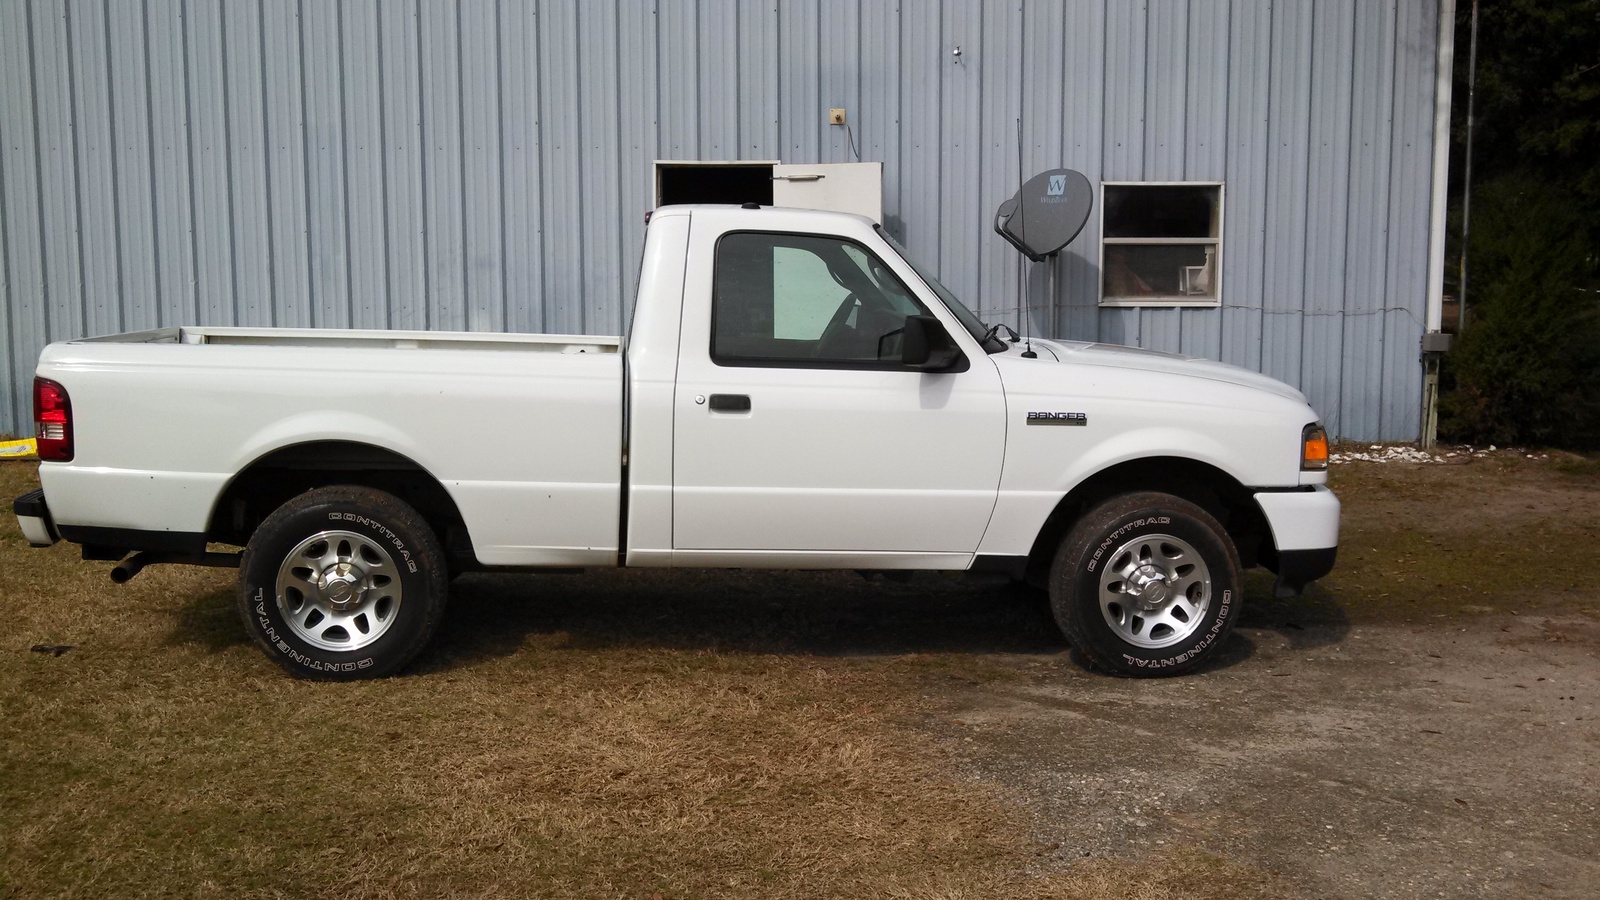 2010 Ford ranger max payload #8